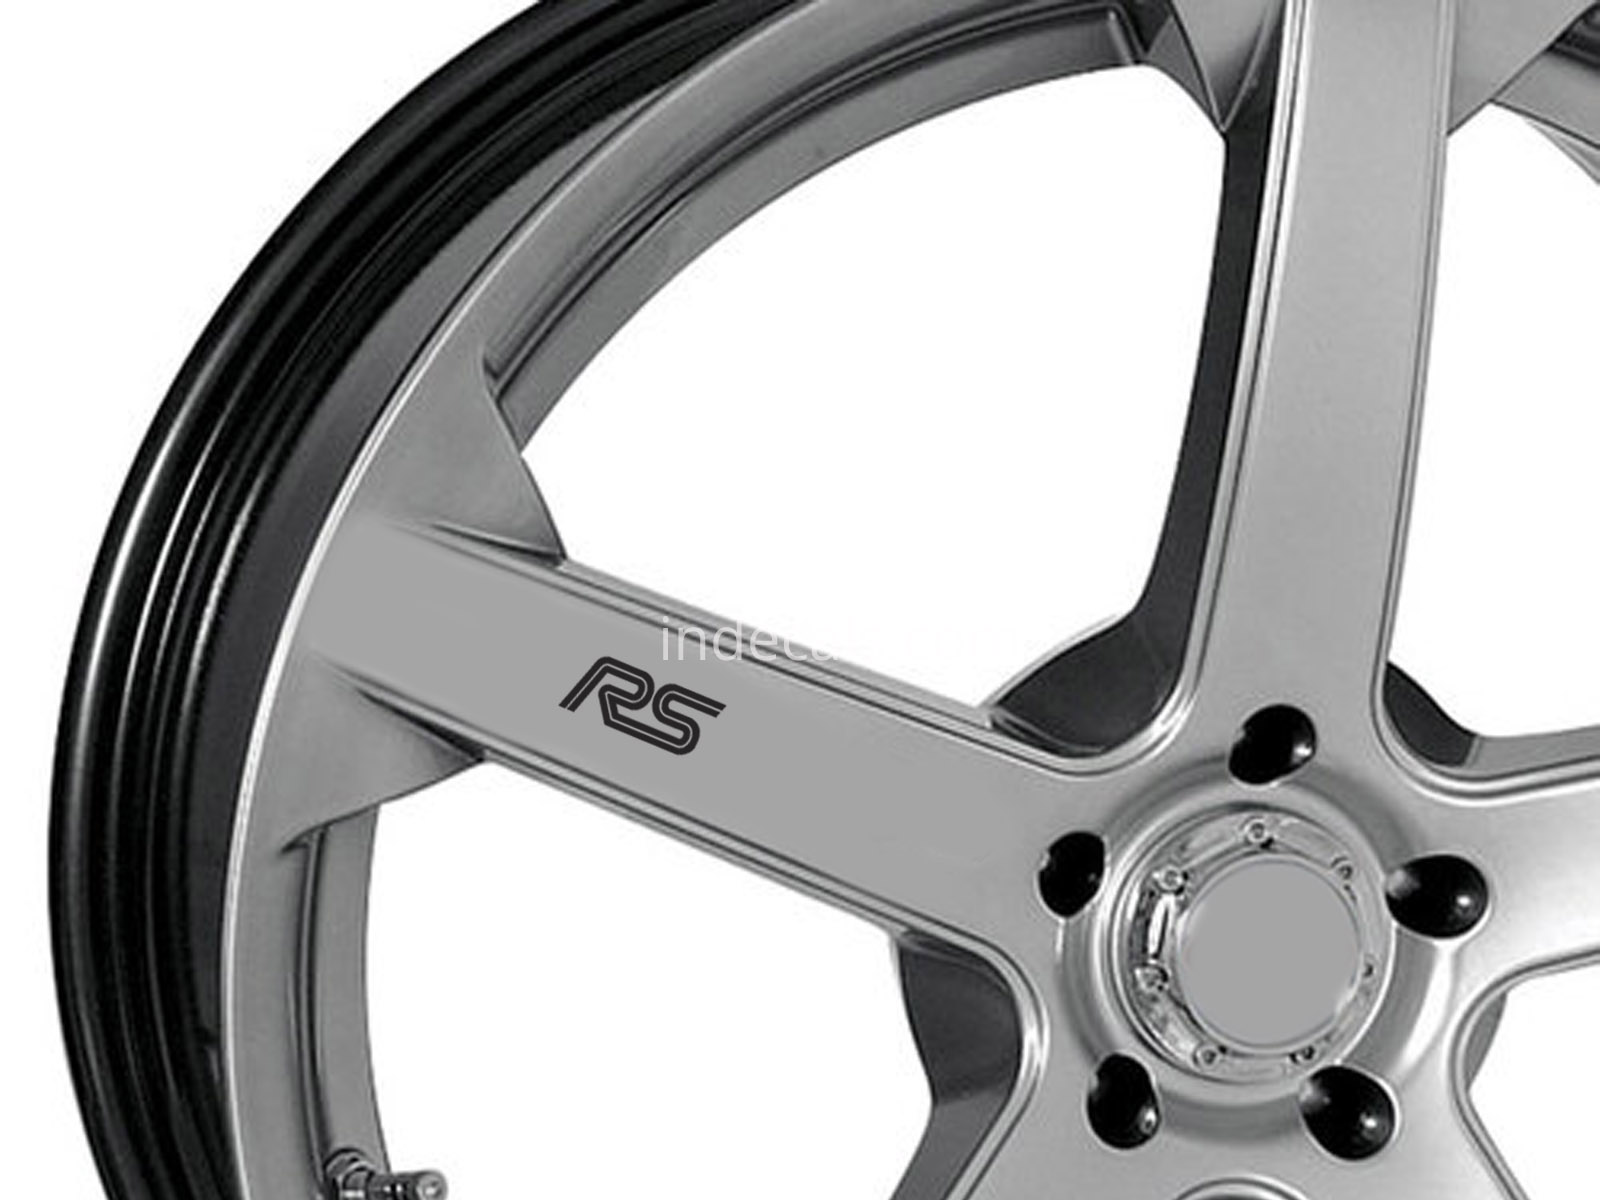 6 x Ford RS Stickers for Wheels - Black